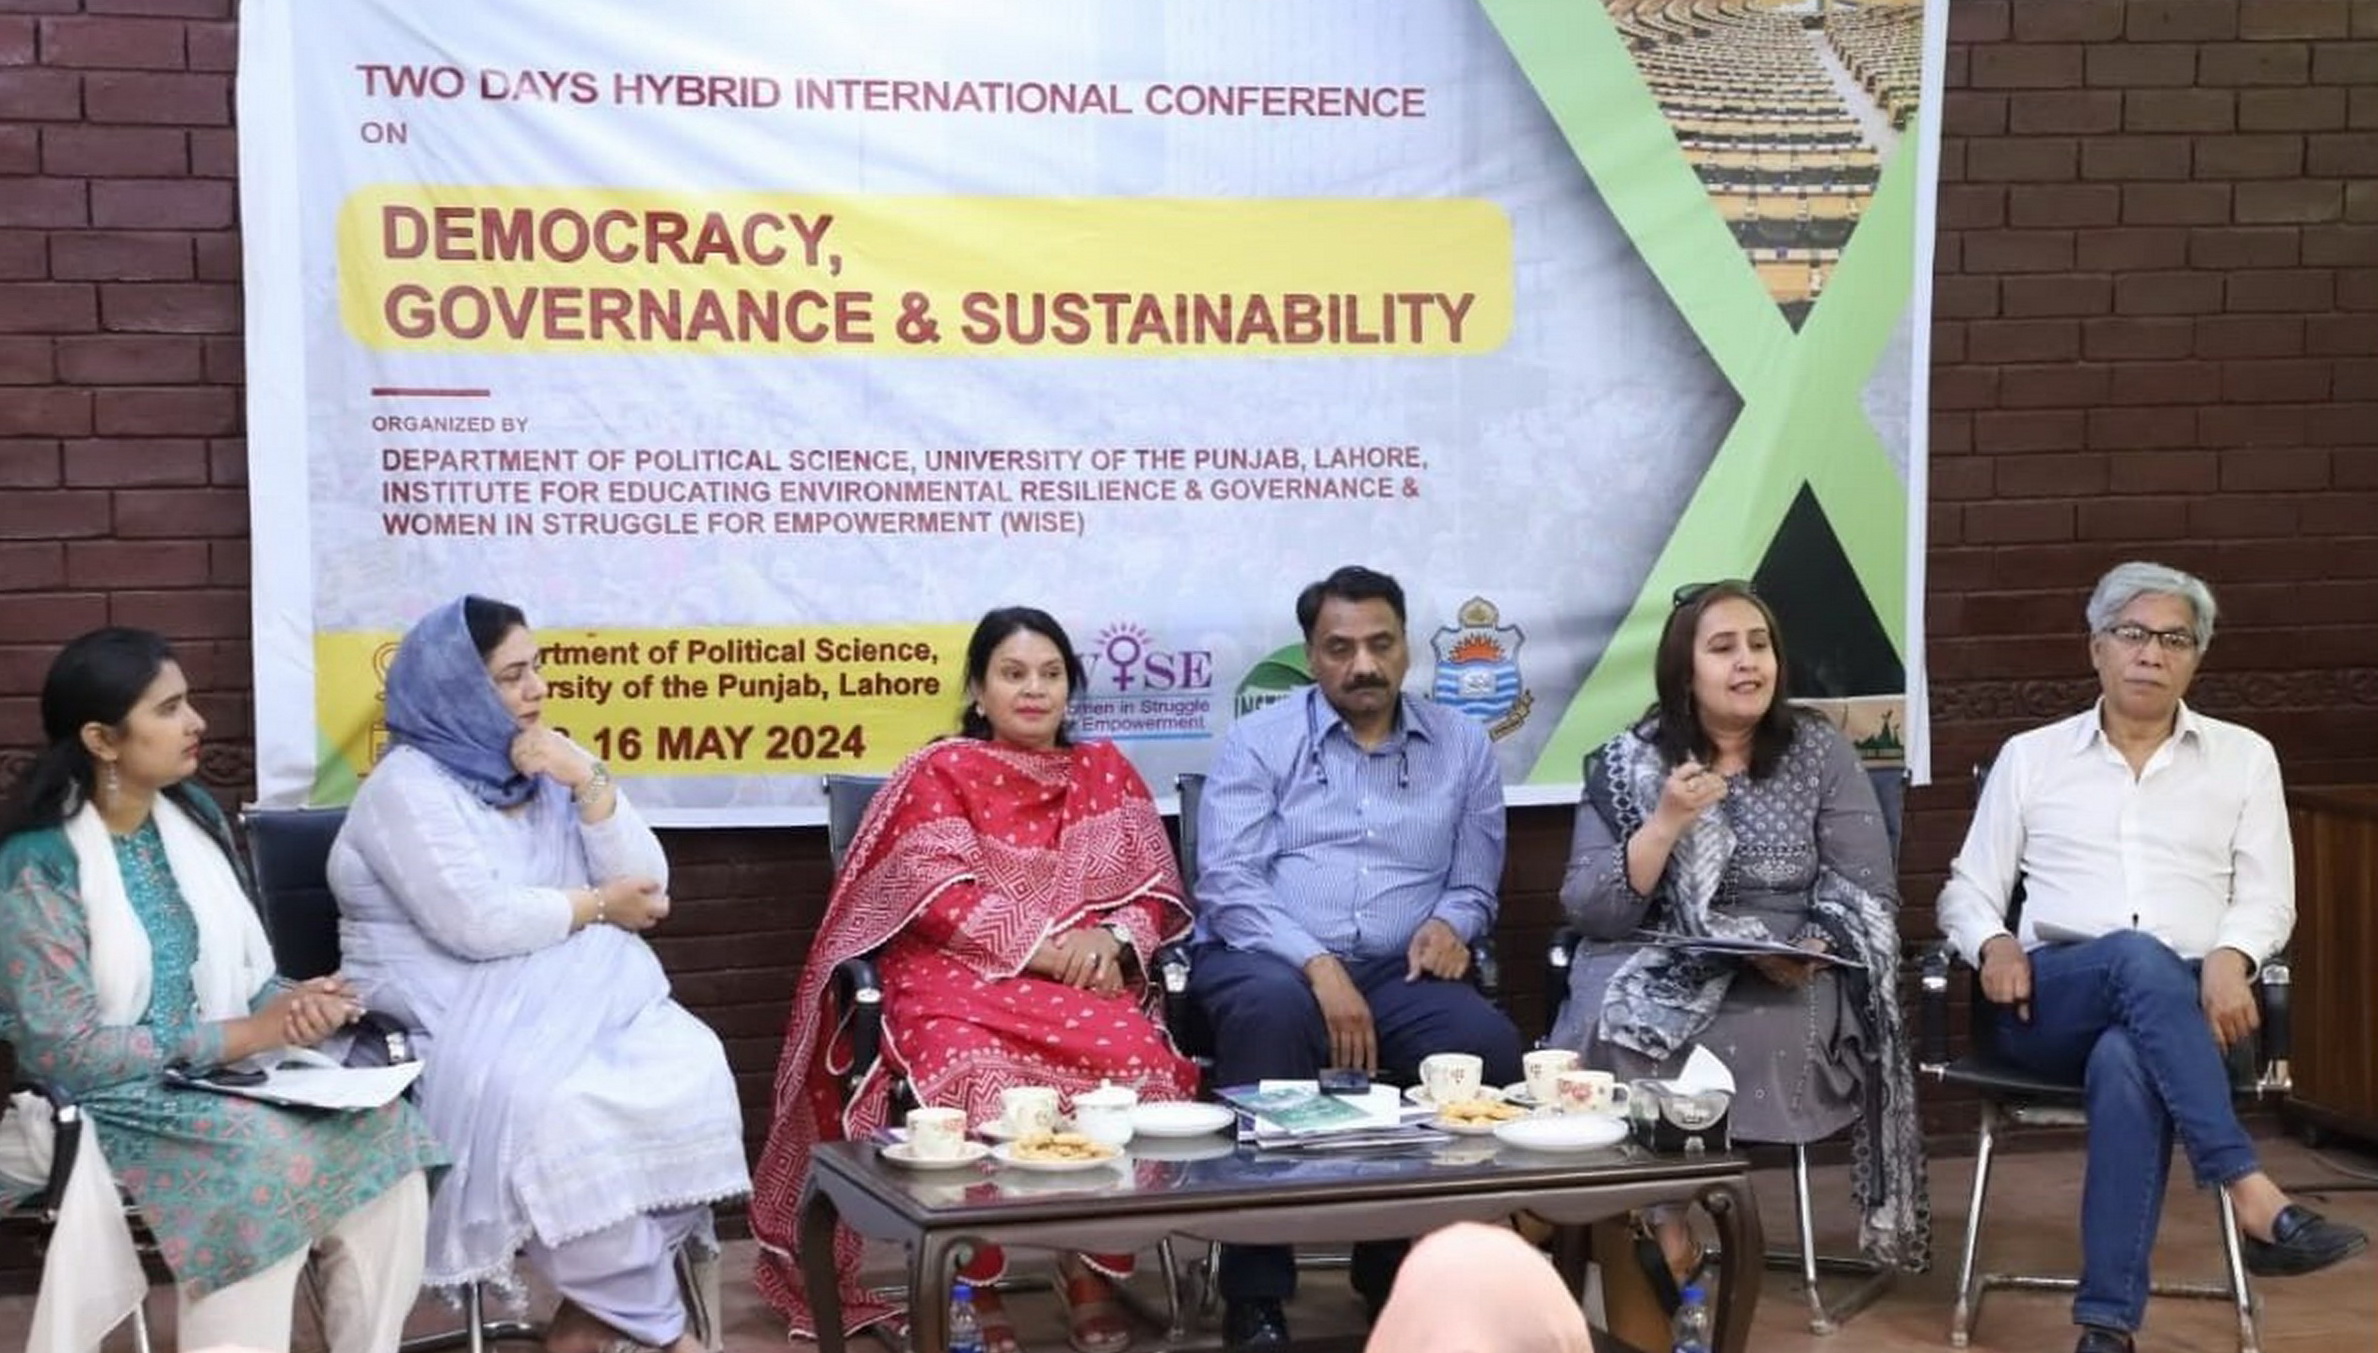 Panel Discussion on Democracy, Governance & Sustainability